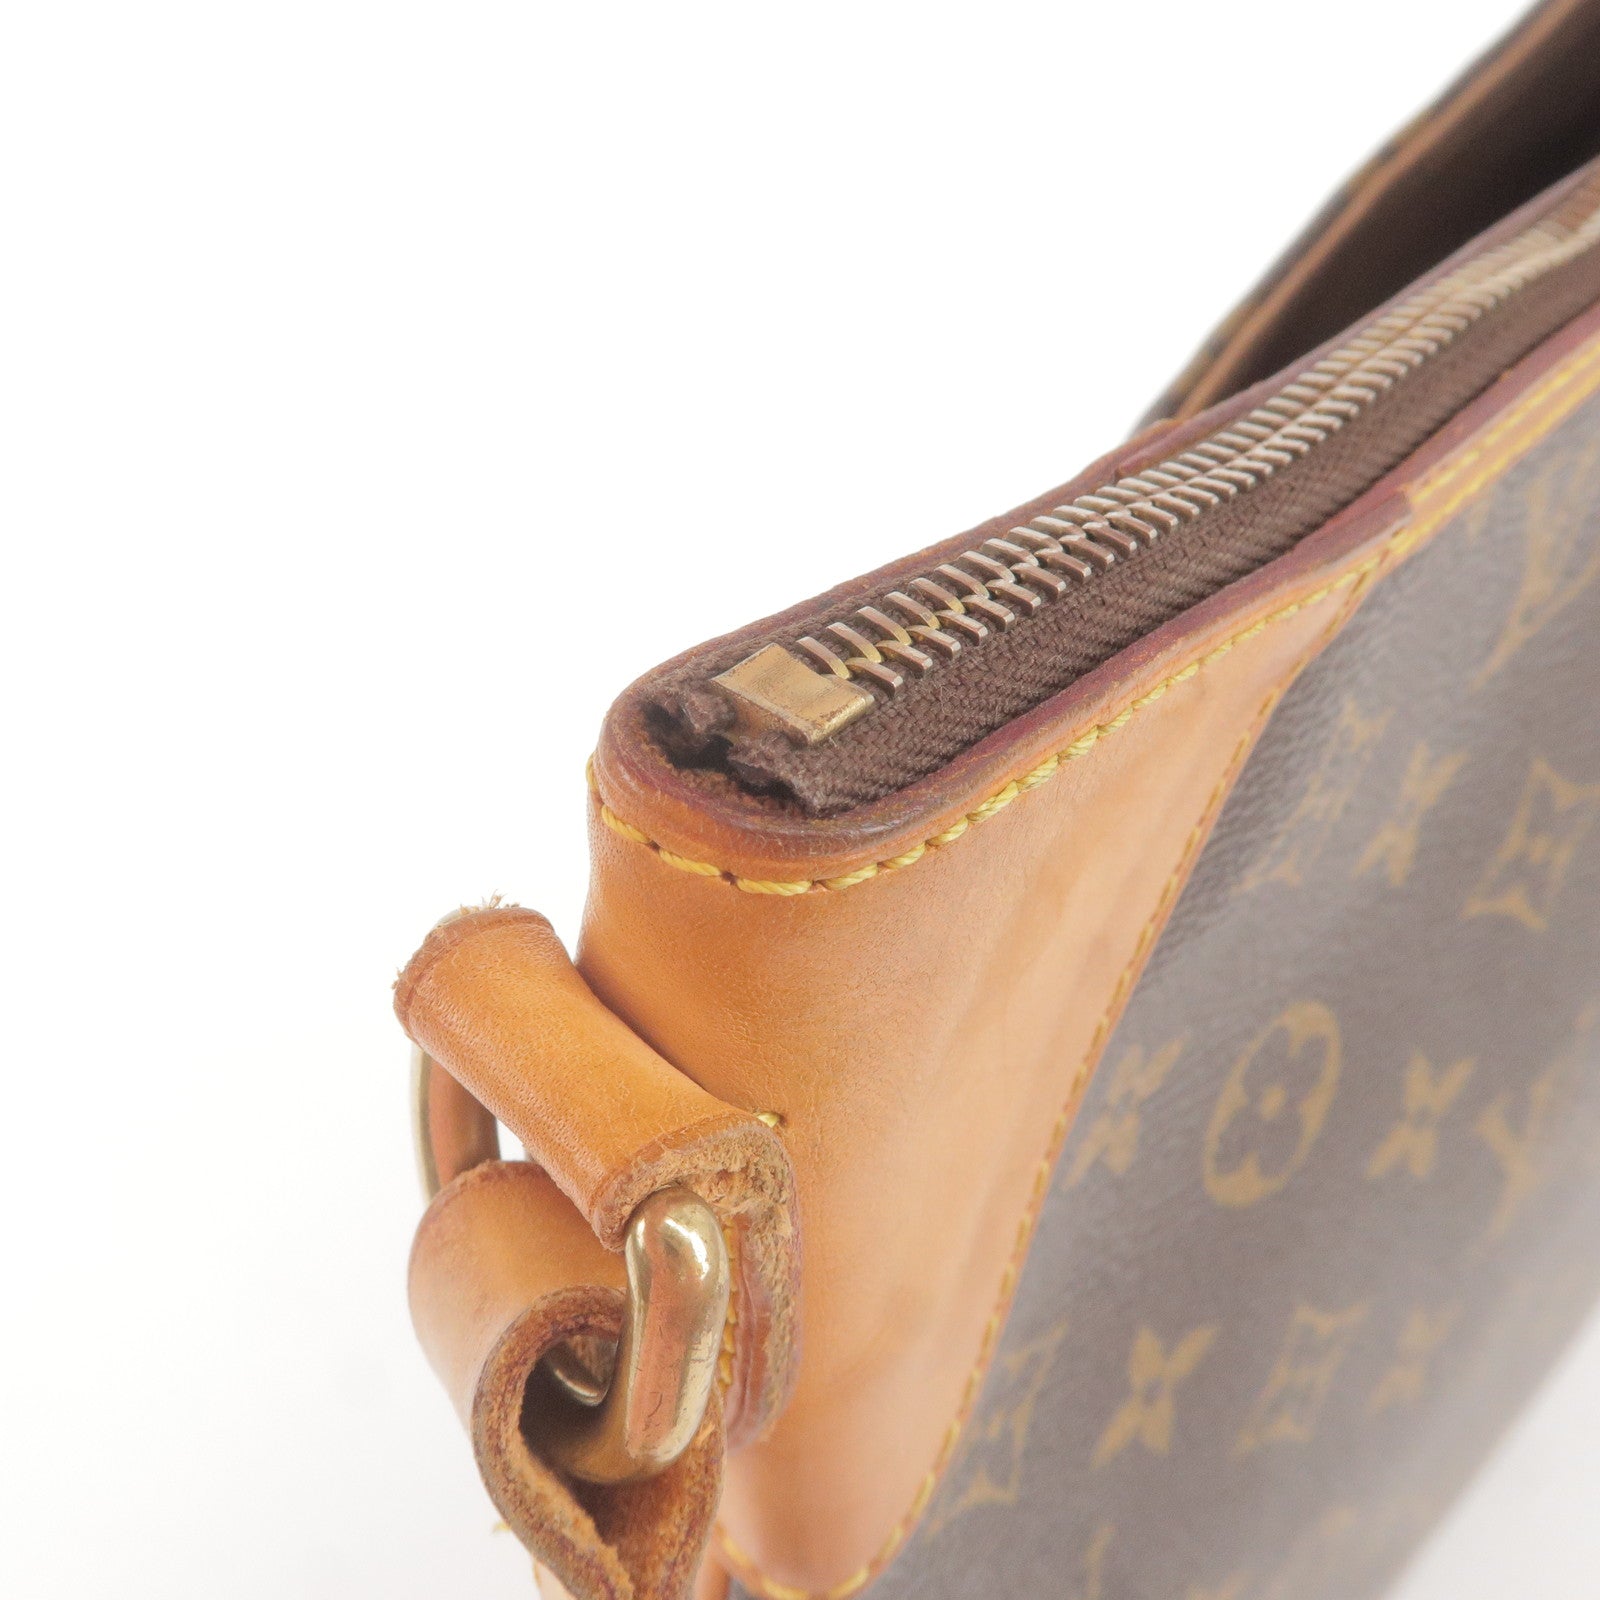 LOUIS VUITTON Odeon GM shoulder bag M56388｜Product Code：2110900031399｜BRAND  OFF Online Store